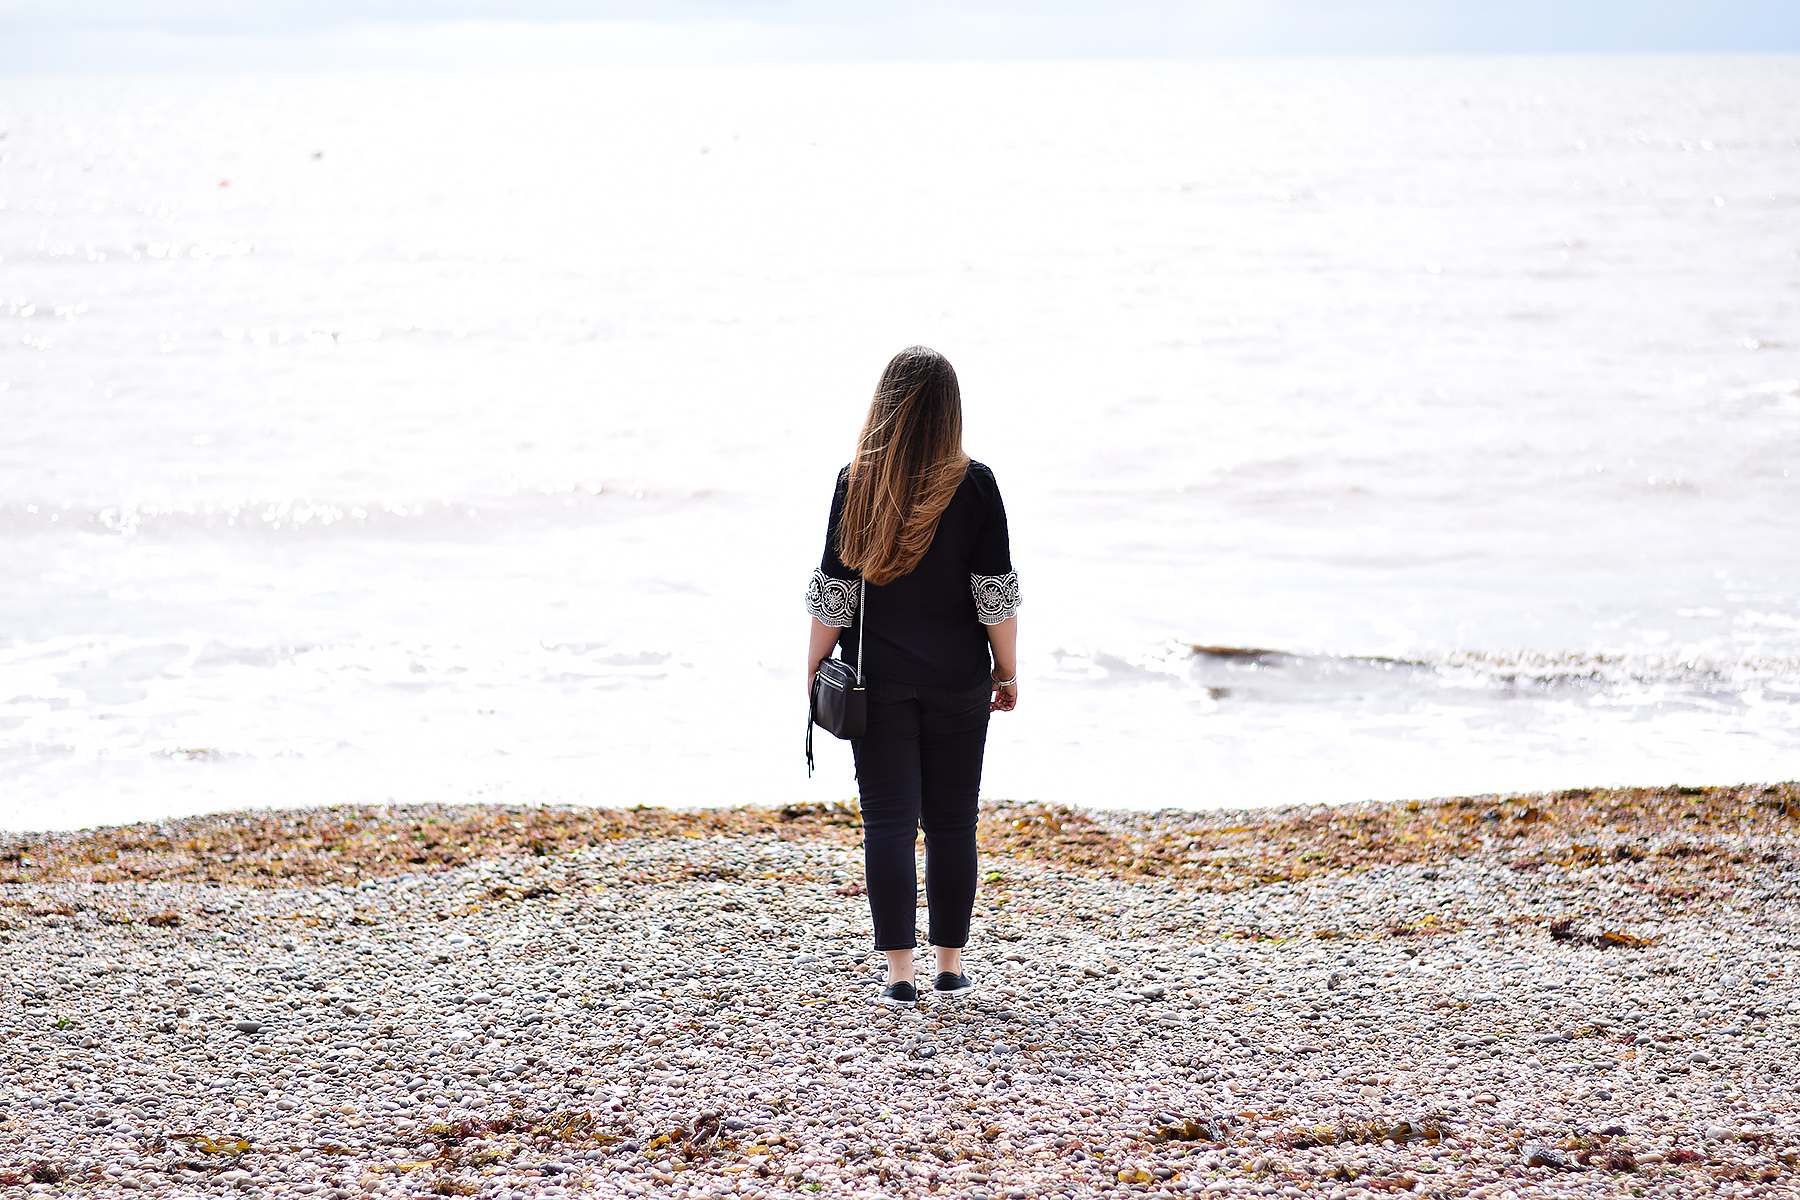 Gemma Jacquard Flower Blog Wearing black embroidered top and looking at the sea